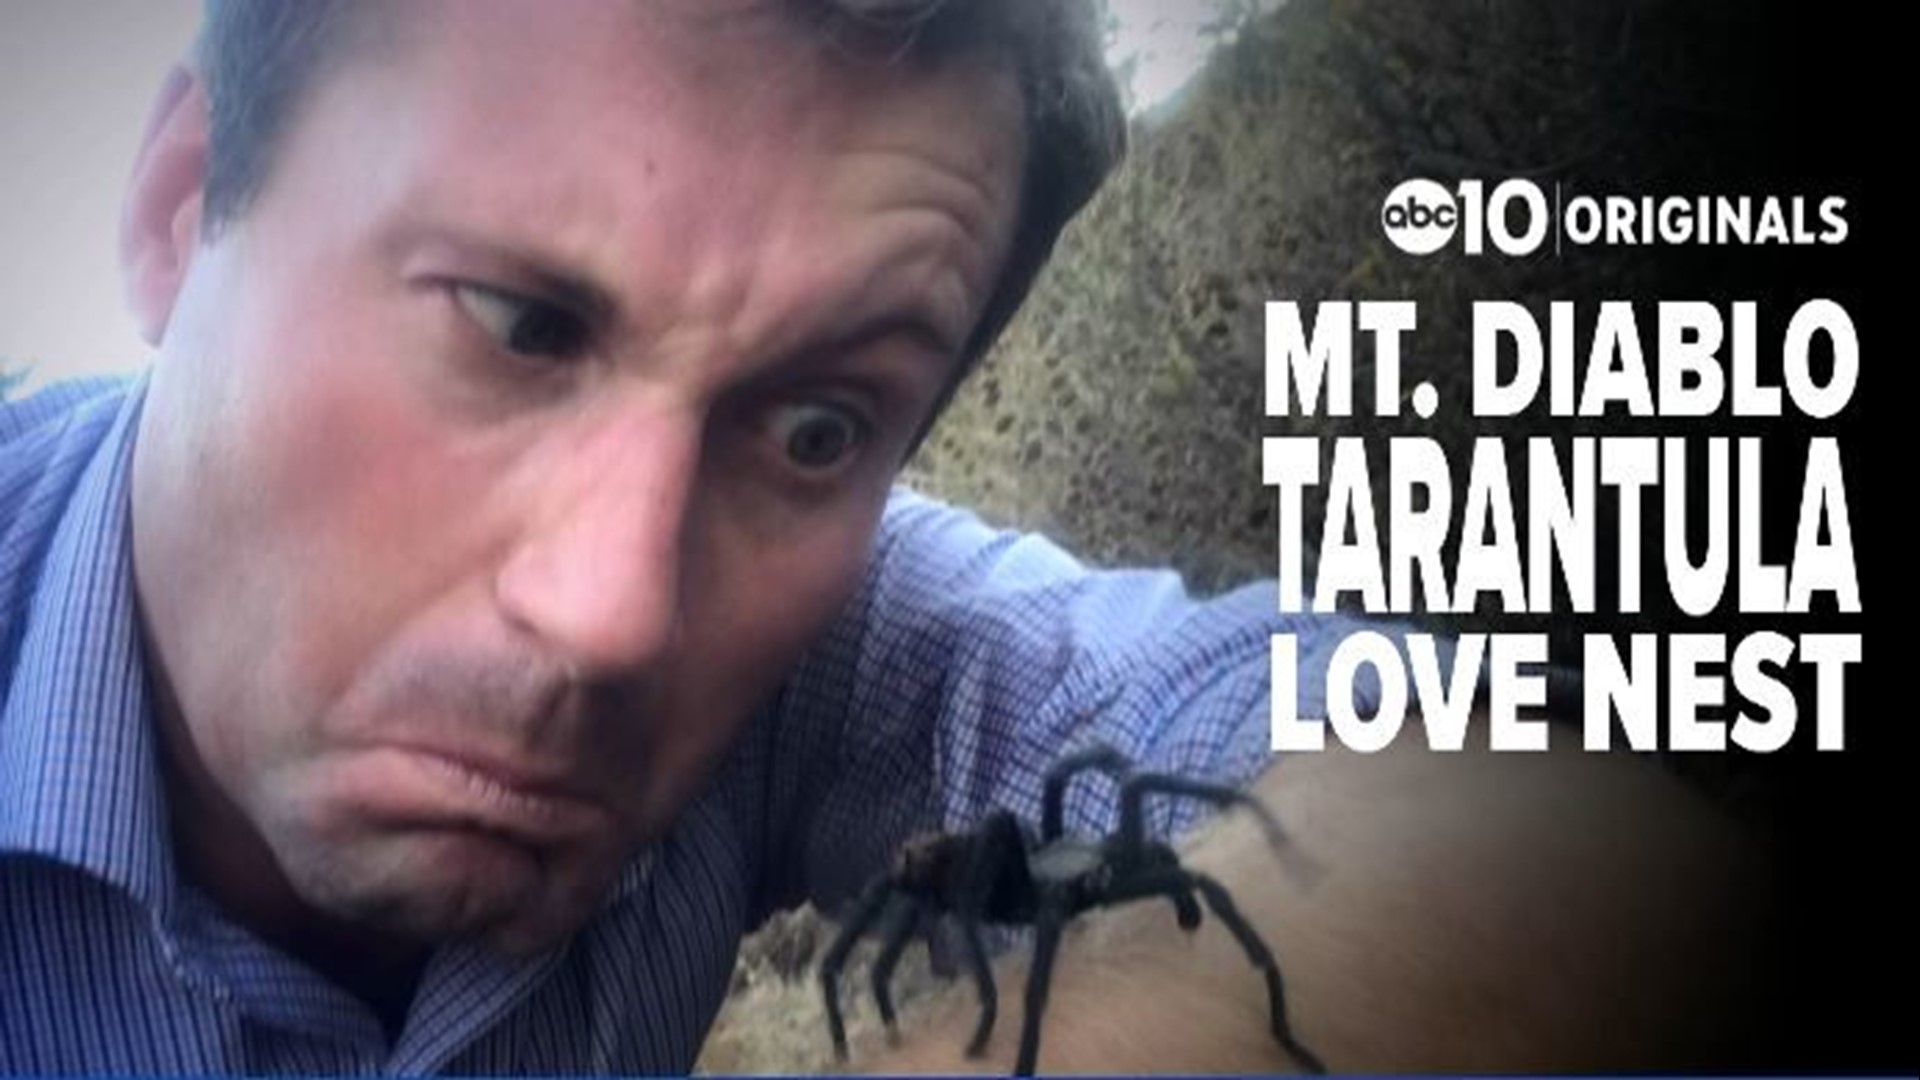 It's tarantula mating season and Mount Diablo State Park is NorCal's hotspot for spider love.